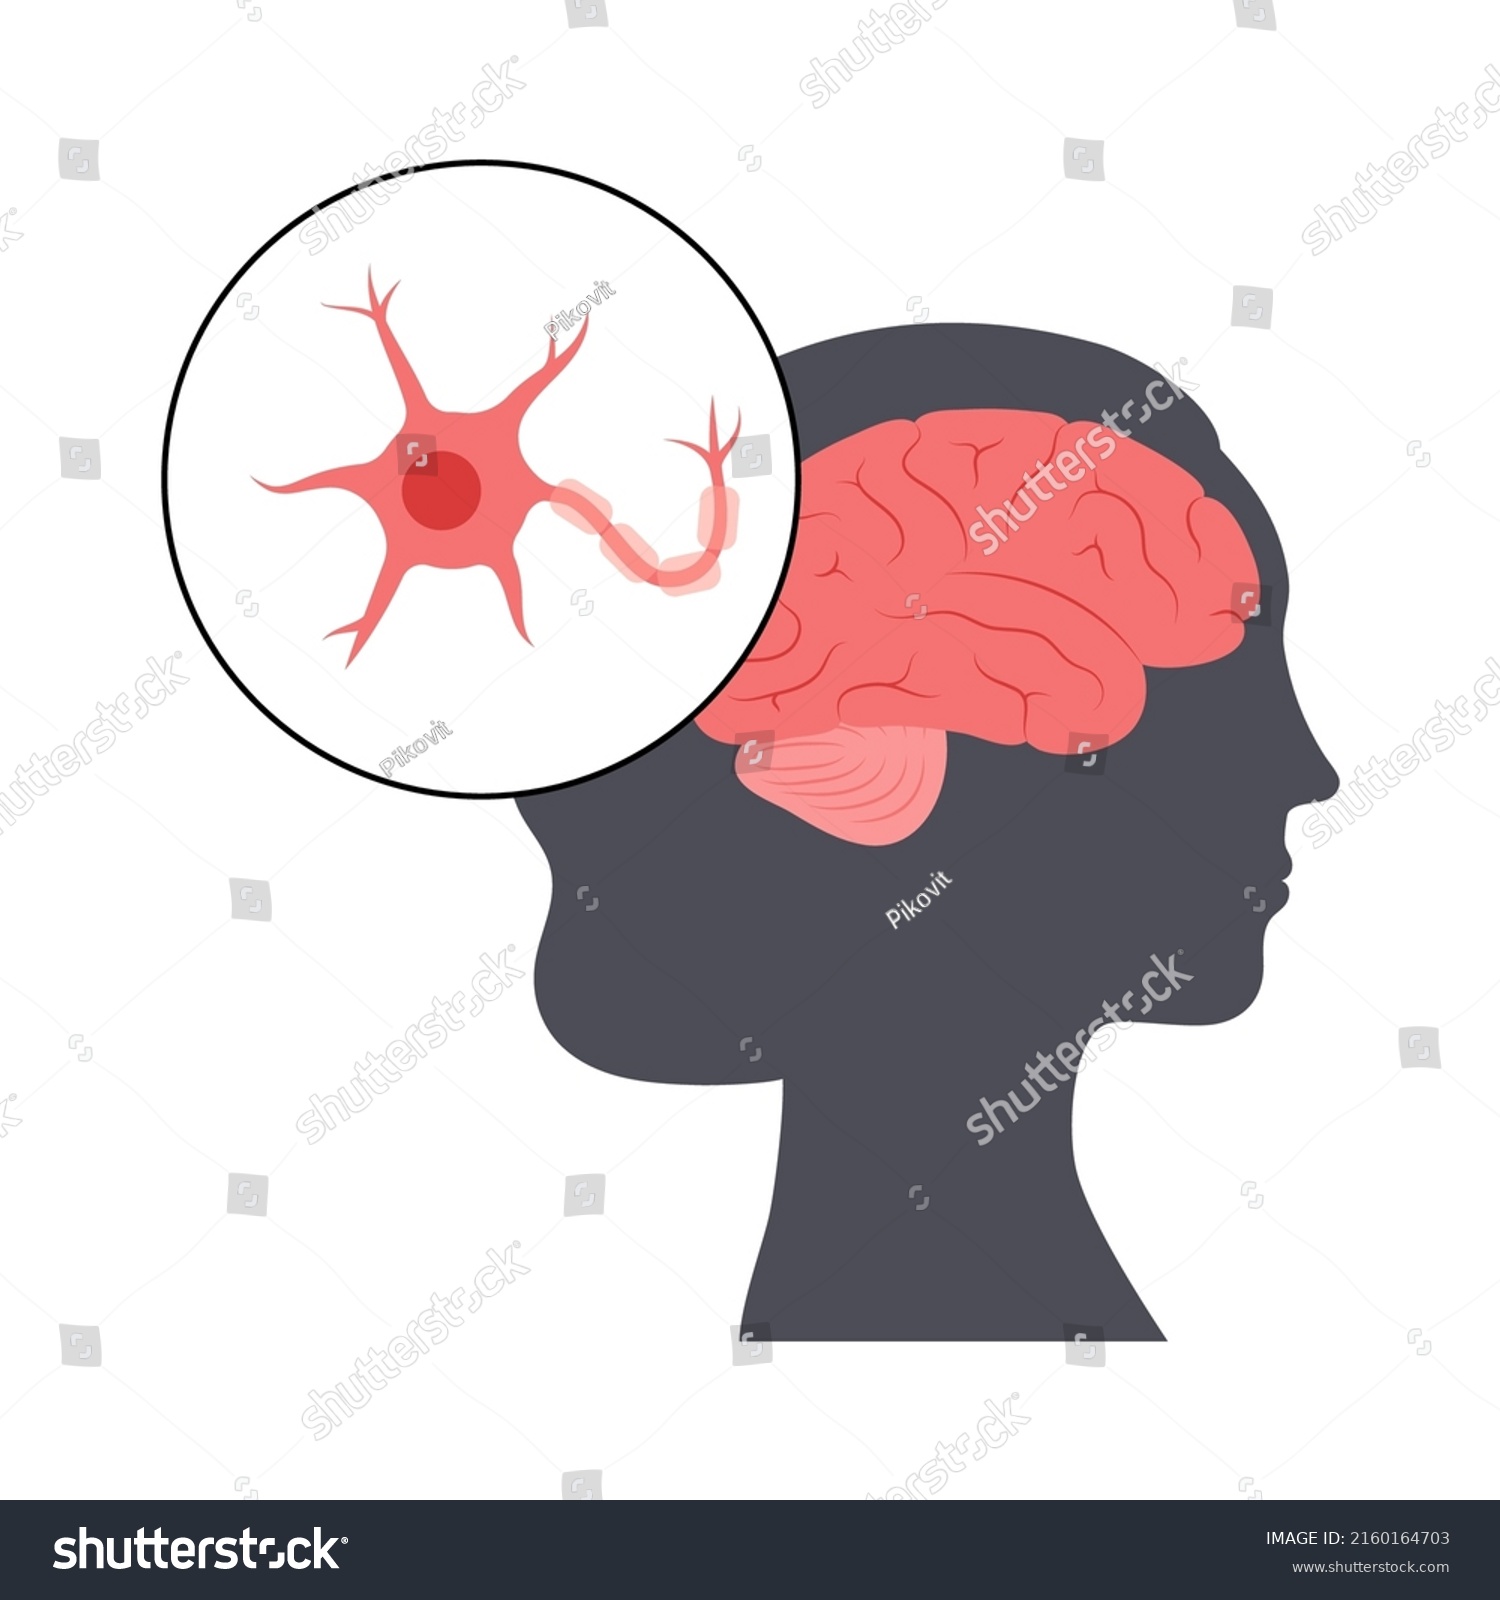 SVG of Anatomy of a neuron. Brain activity in the human body concept. Dendrites, nucleus, axon terminal and myelin sheath medical poster flat vector illustration for clinic or education. svg